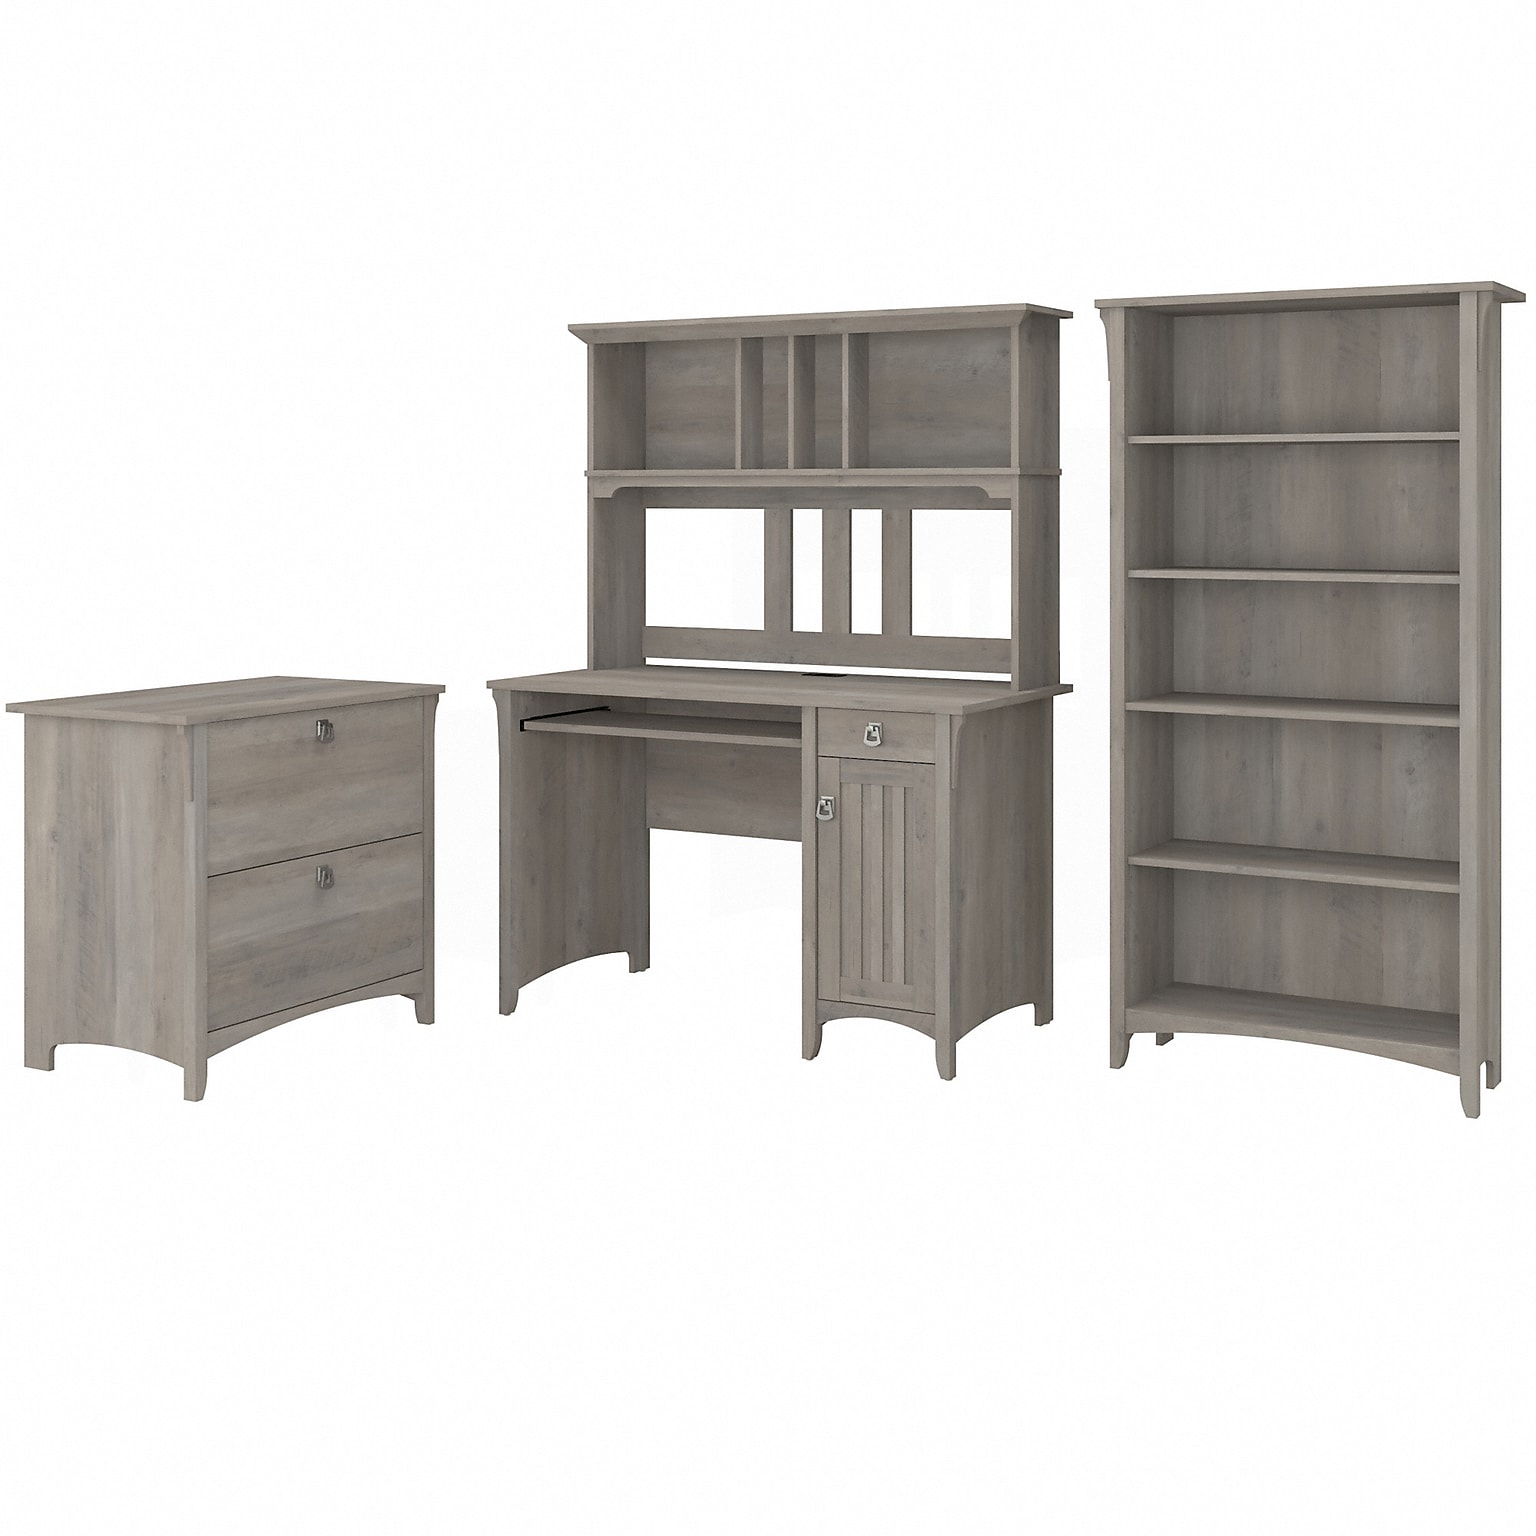 Bush Furniture Salinas 47 Computer Desk with Hutch, Lateral File Cabinet and 5-Shelf Bookcase, Driftwood Gray (SAL002DG)